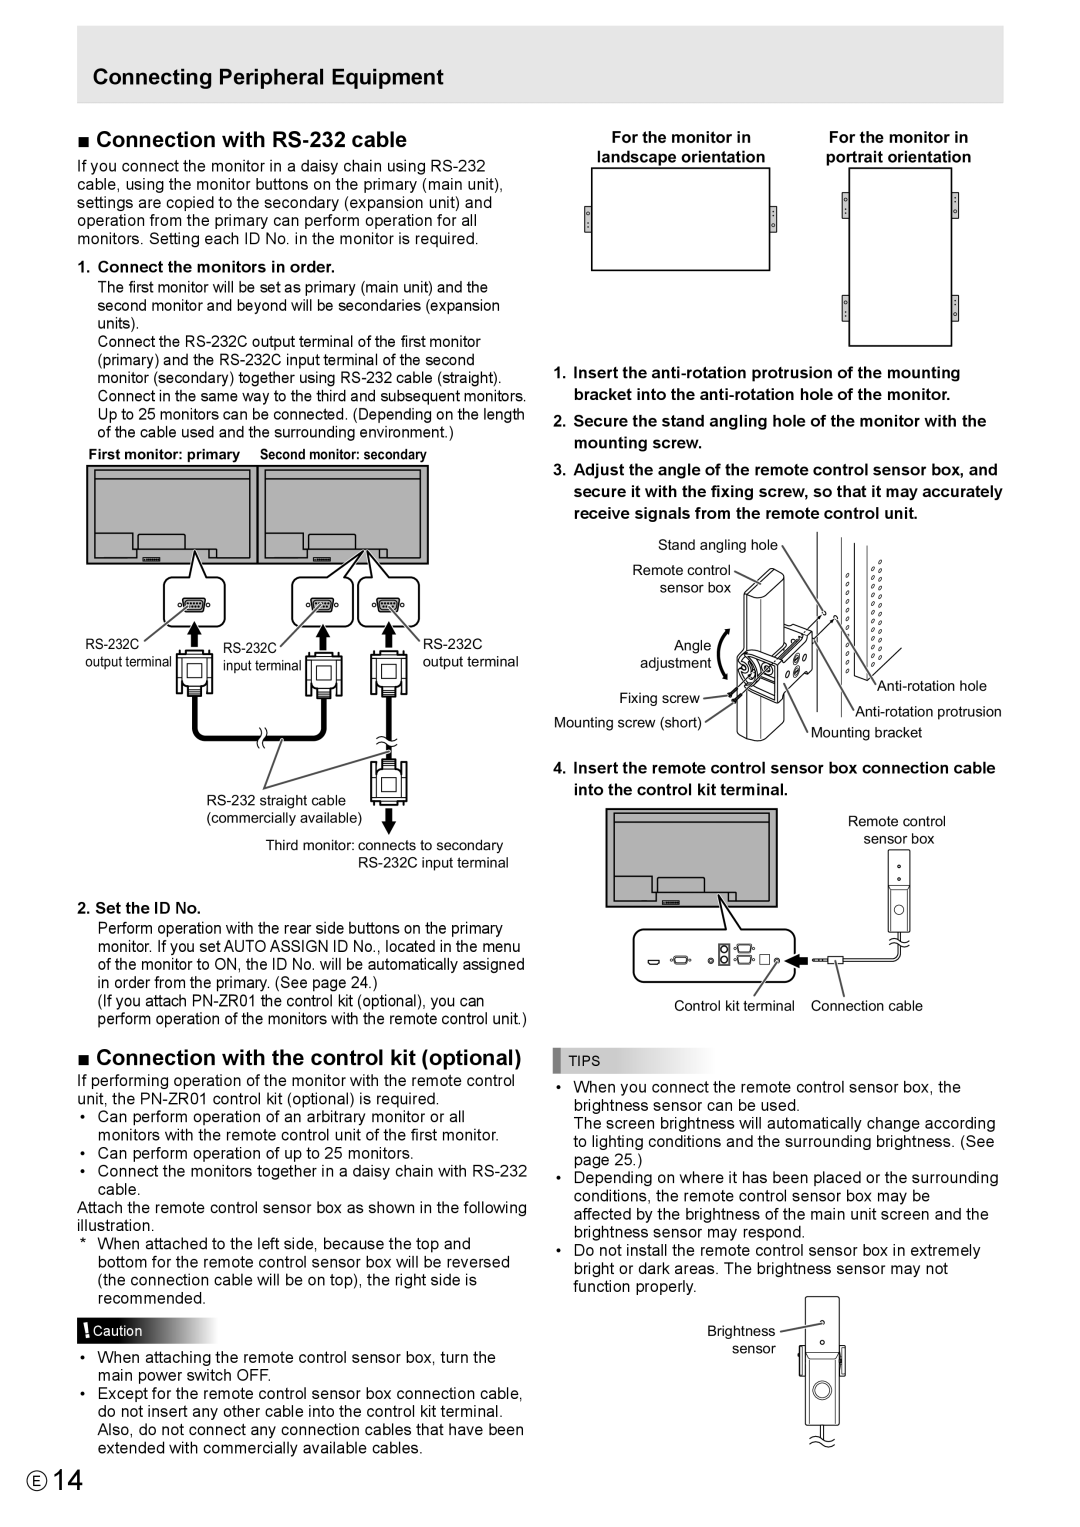 Sharp PN-V602 operation manual Connection with the control kit optional, Connect the monitors in order, Set the ID No 